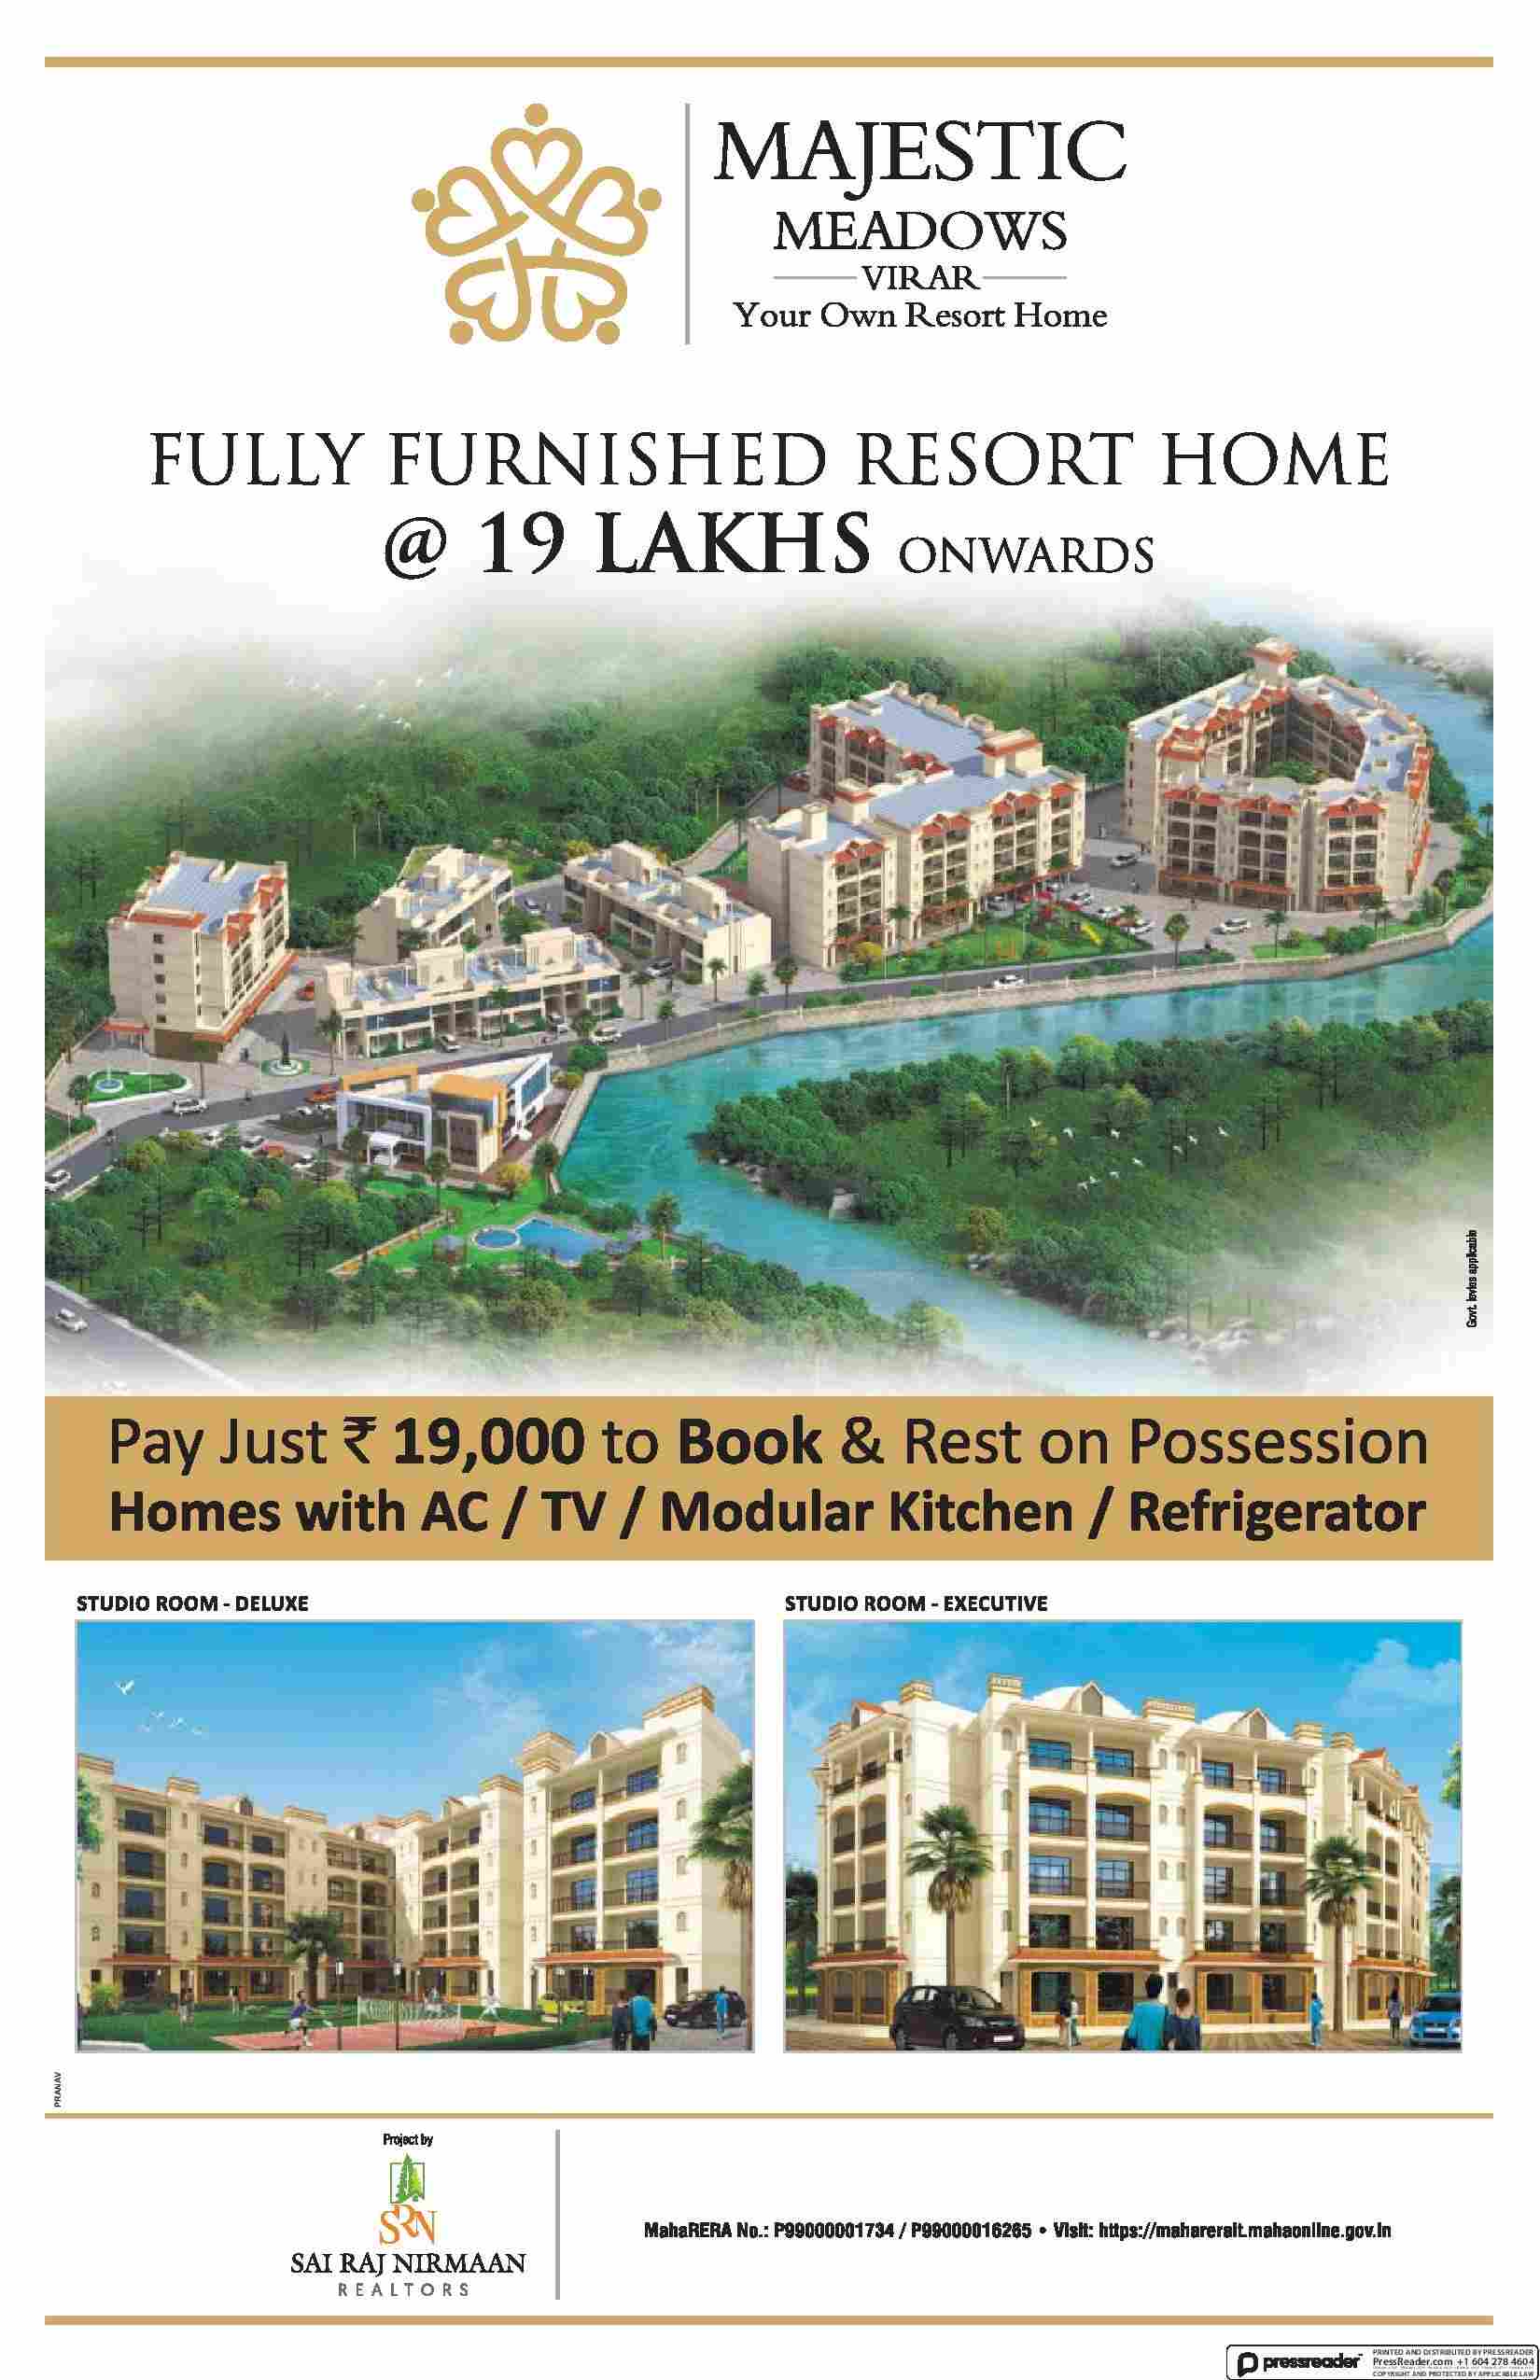 Pay just Rs. 19,000 to book and rest on possession at SRN Majestic Meadows in Mumbai Update